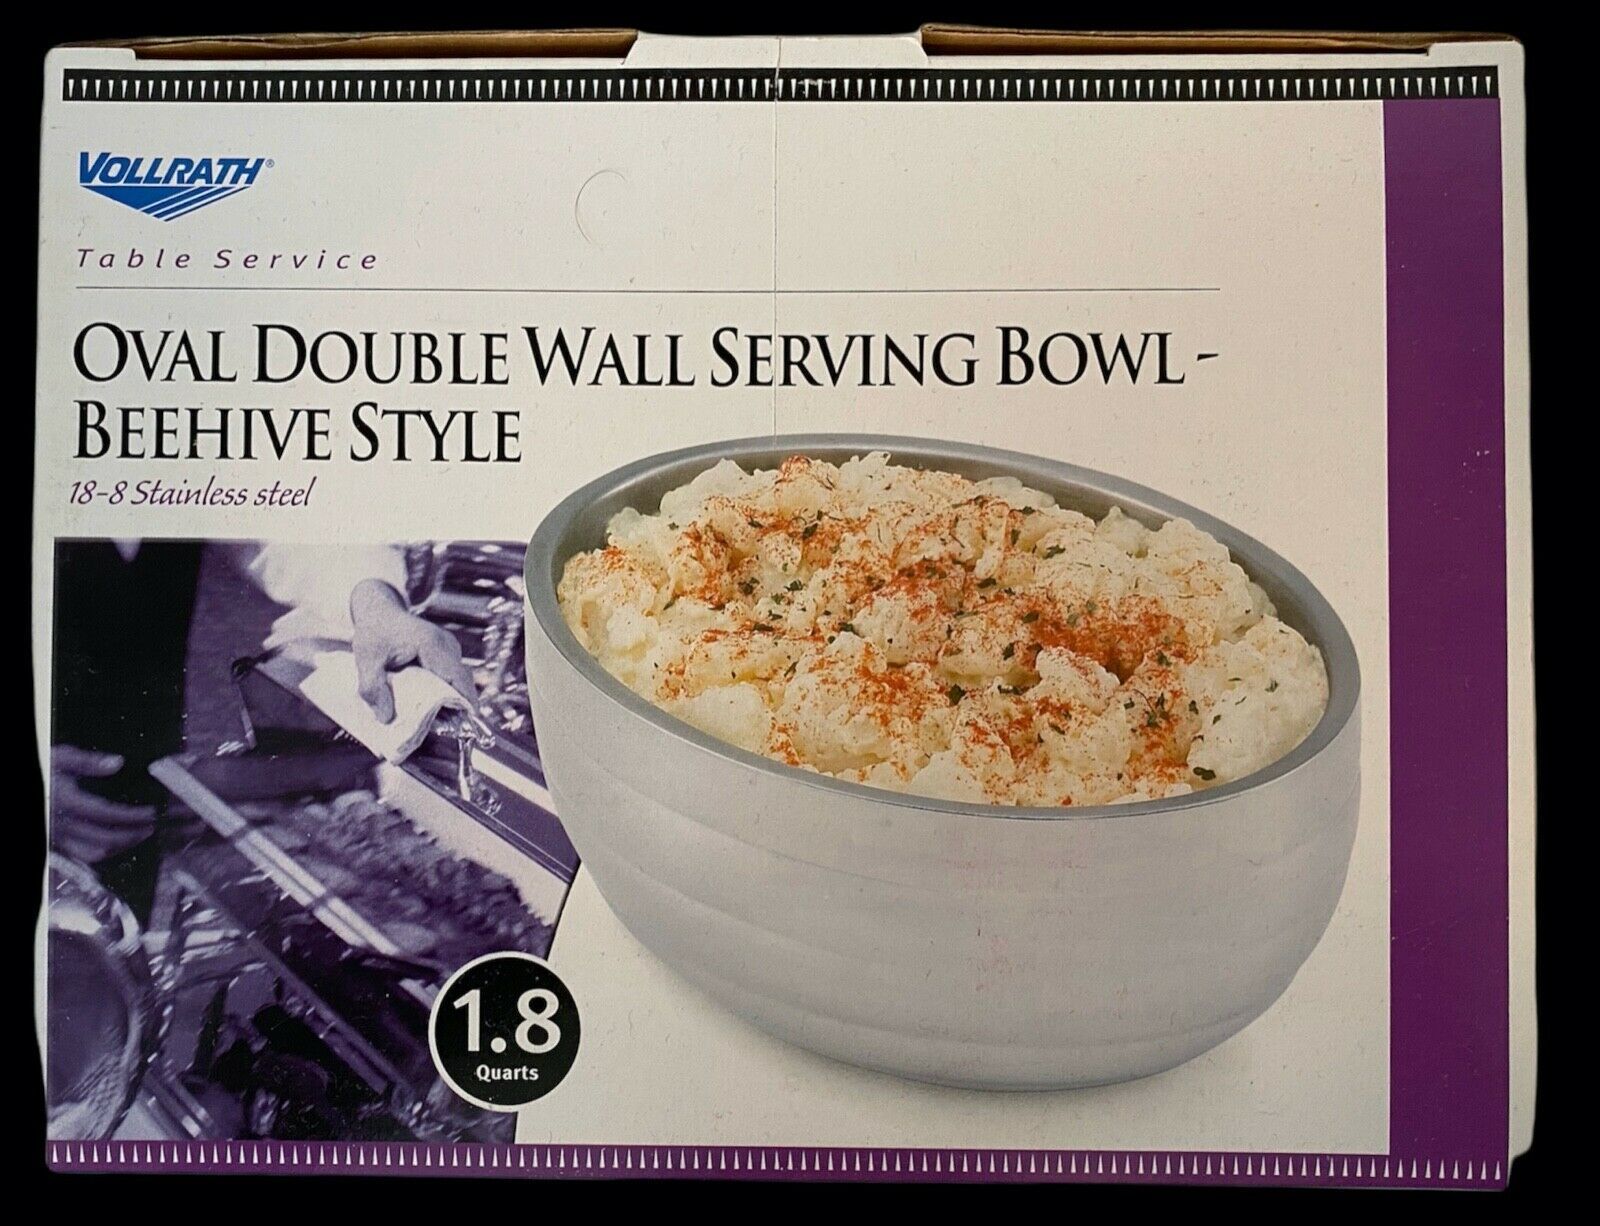 Vollrath Double Wall Serving Bowl Beehive Style 18-8 Stainless Steel 1.8 Quarts - $71.99